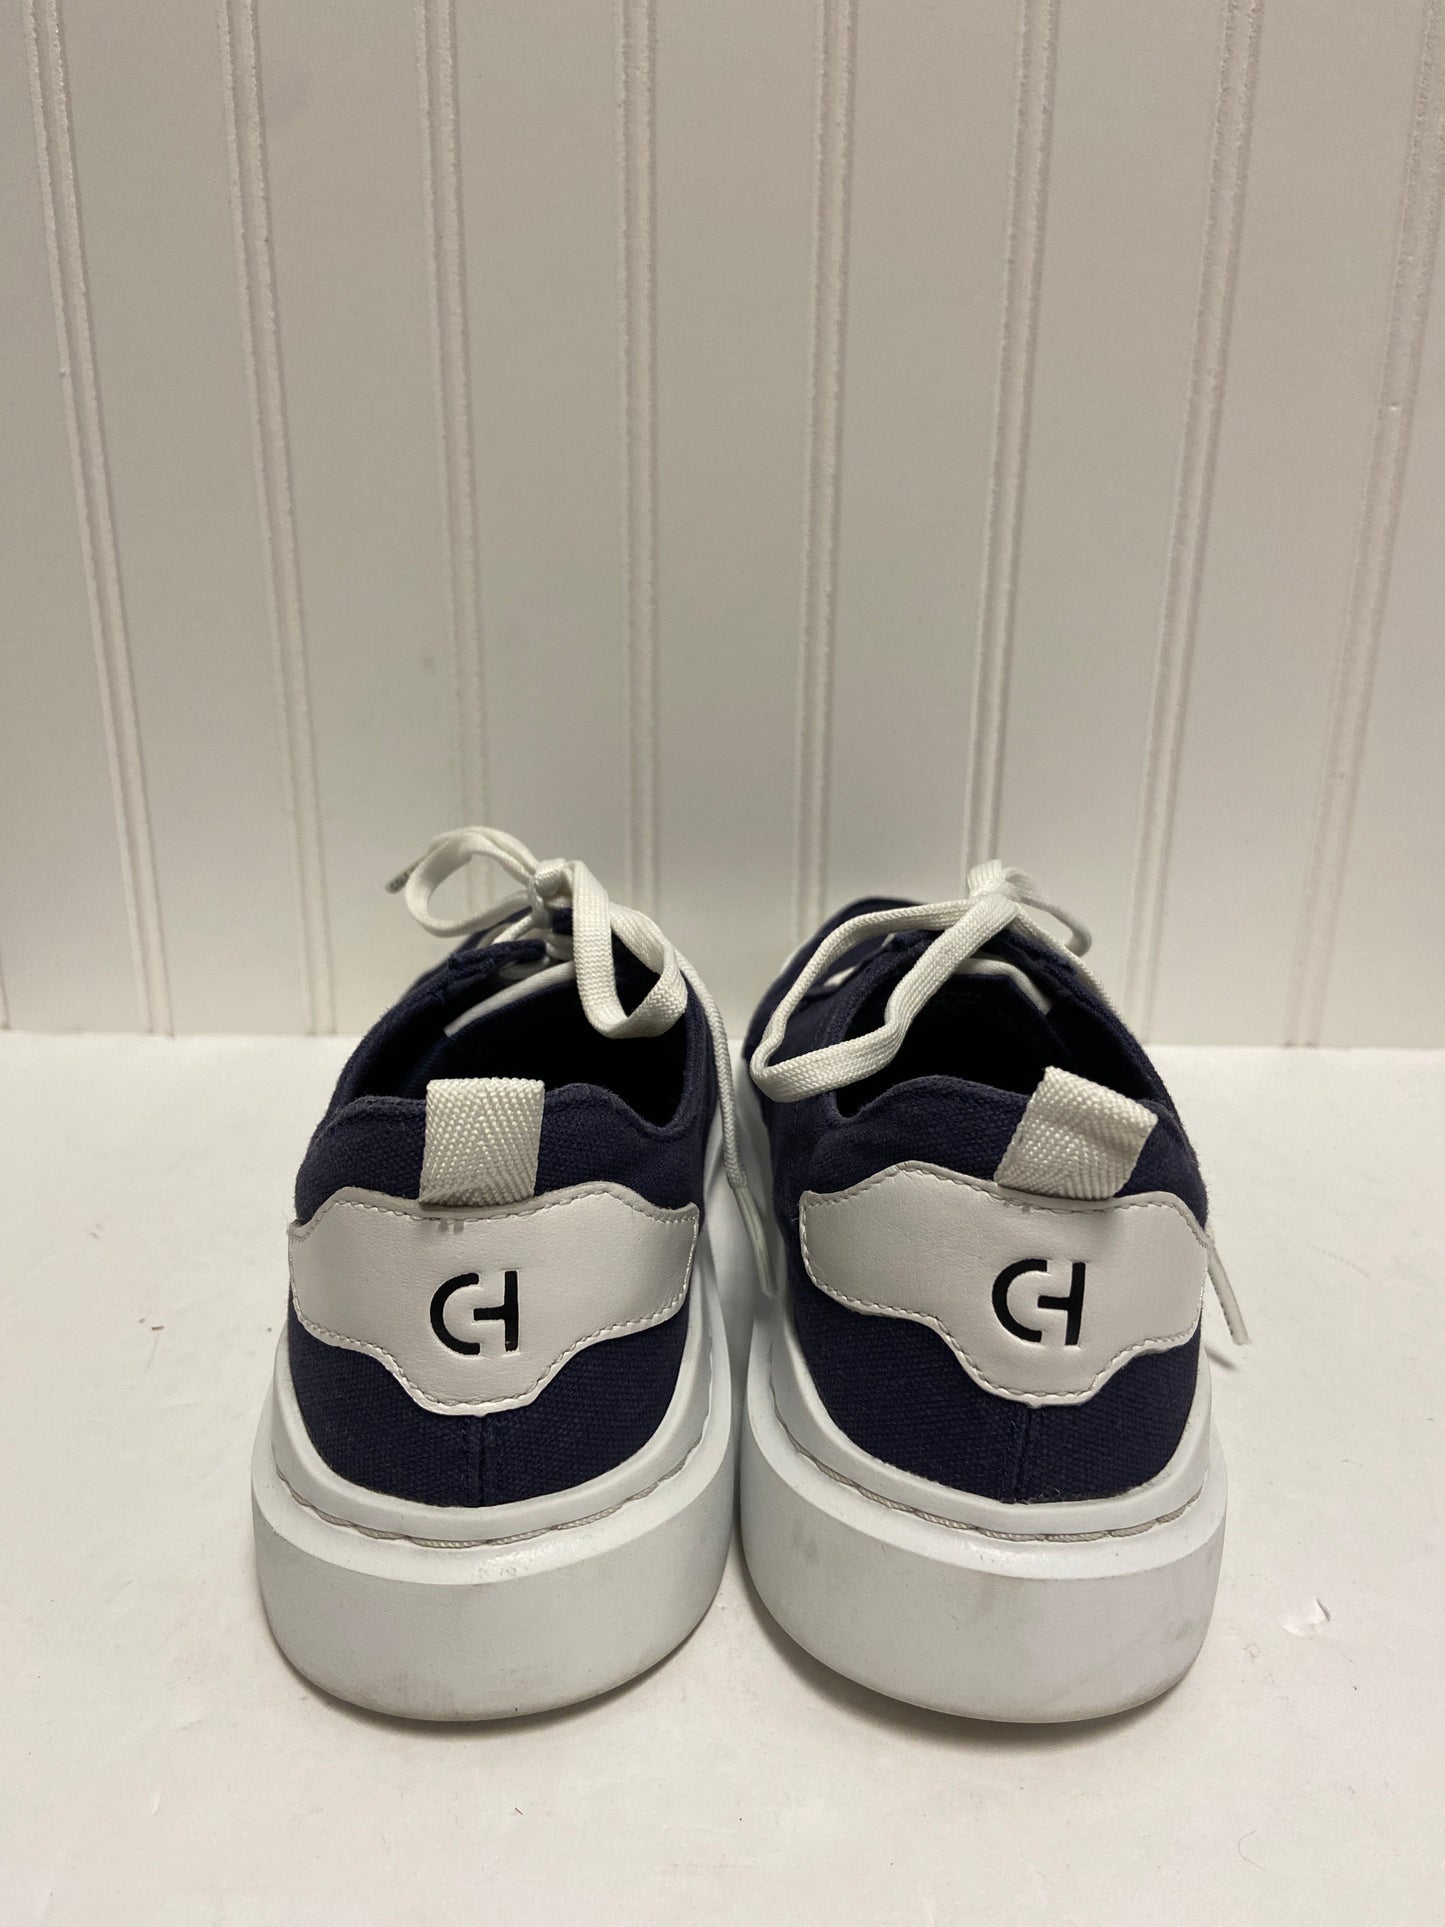 Shoes Designer By Cole-haan  Size: 7.5